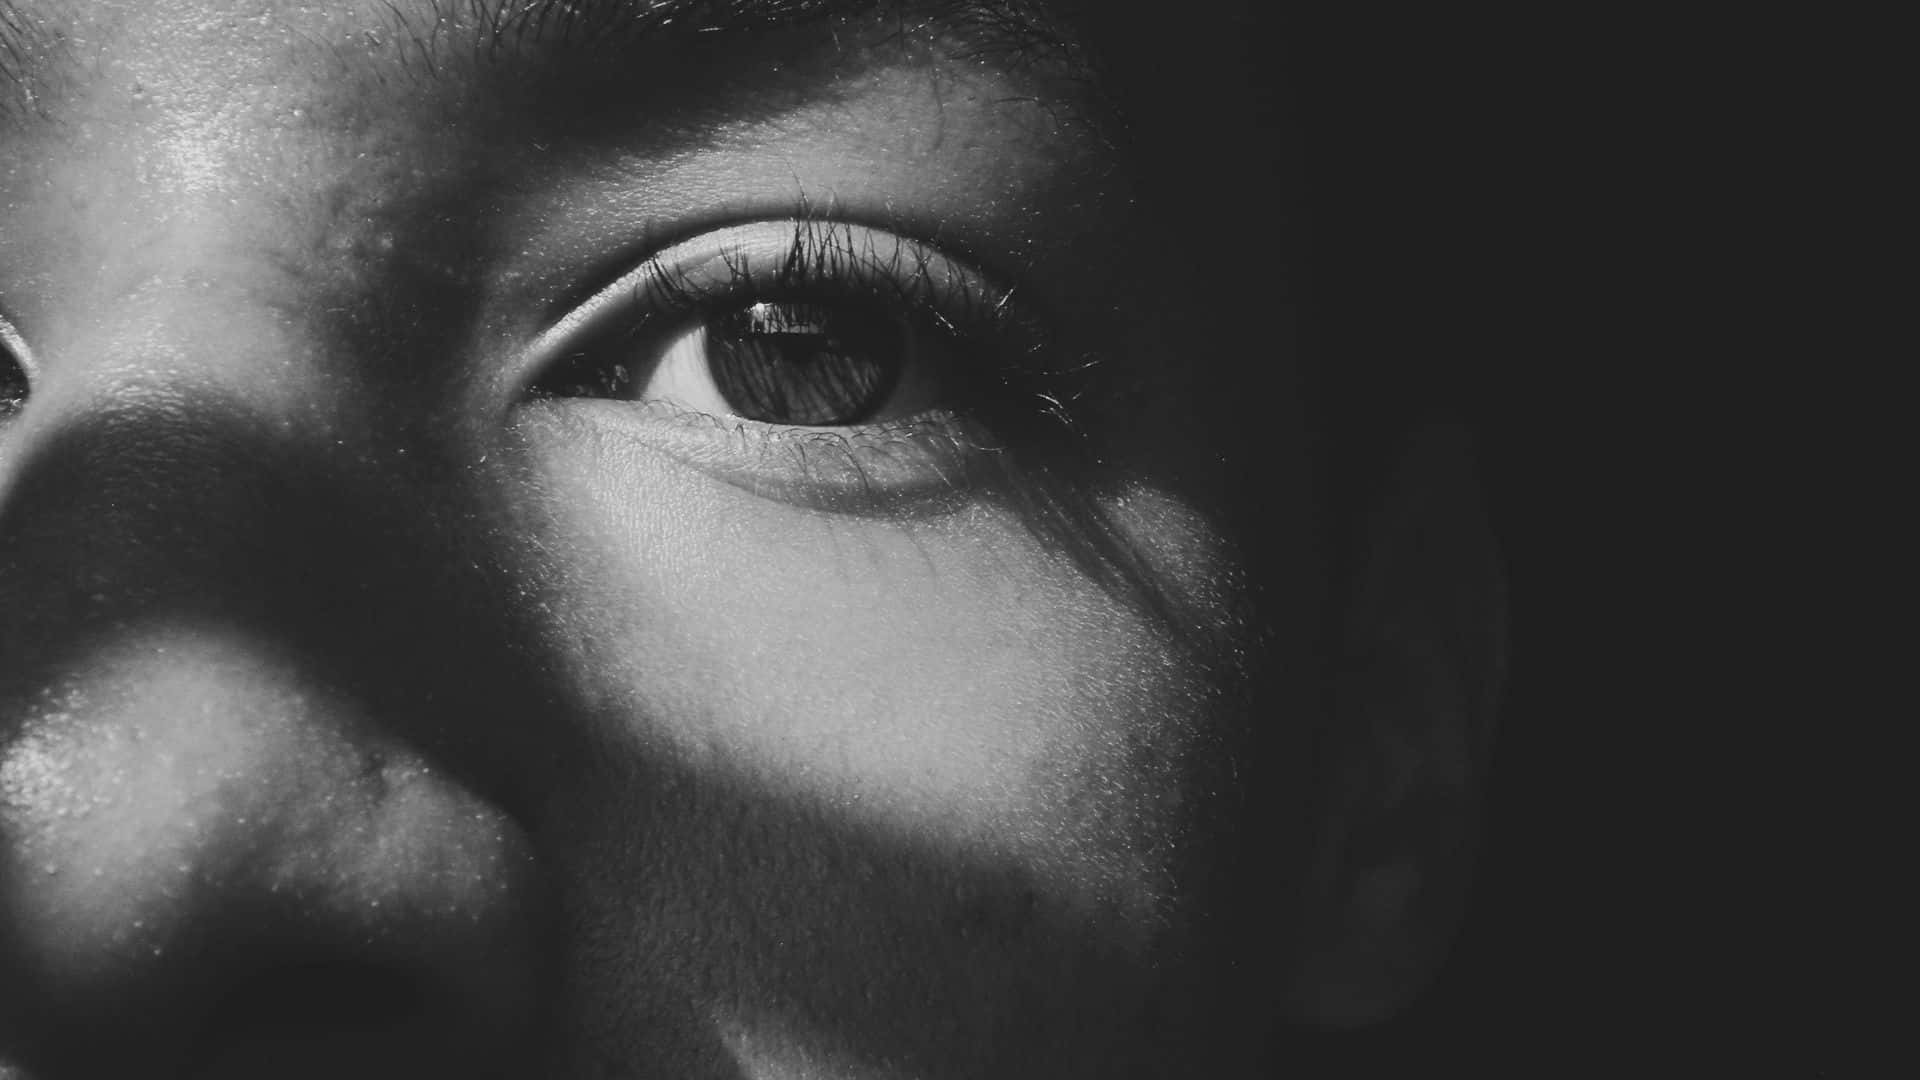 A Black And White Photo Of A Person's Eye